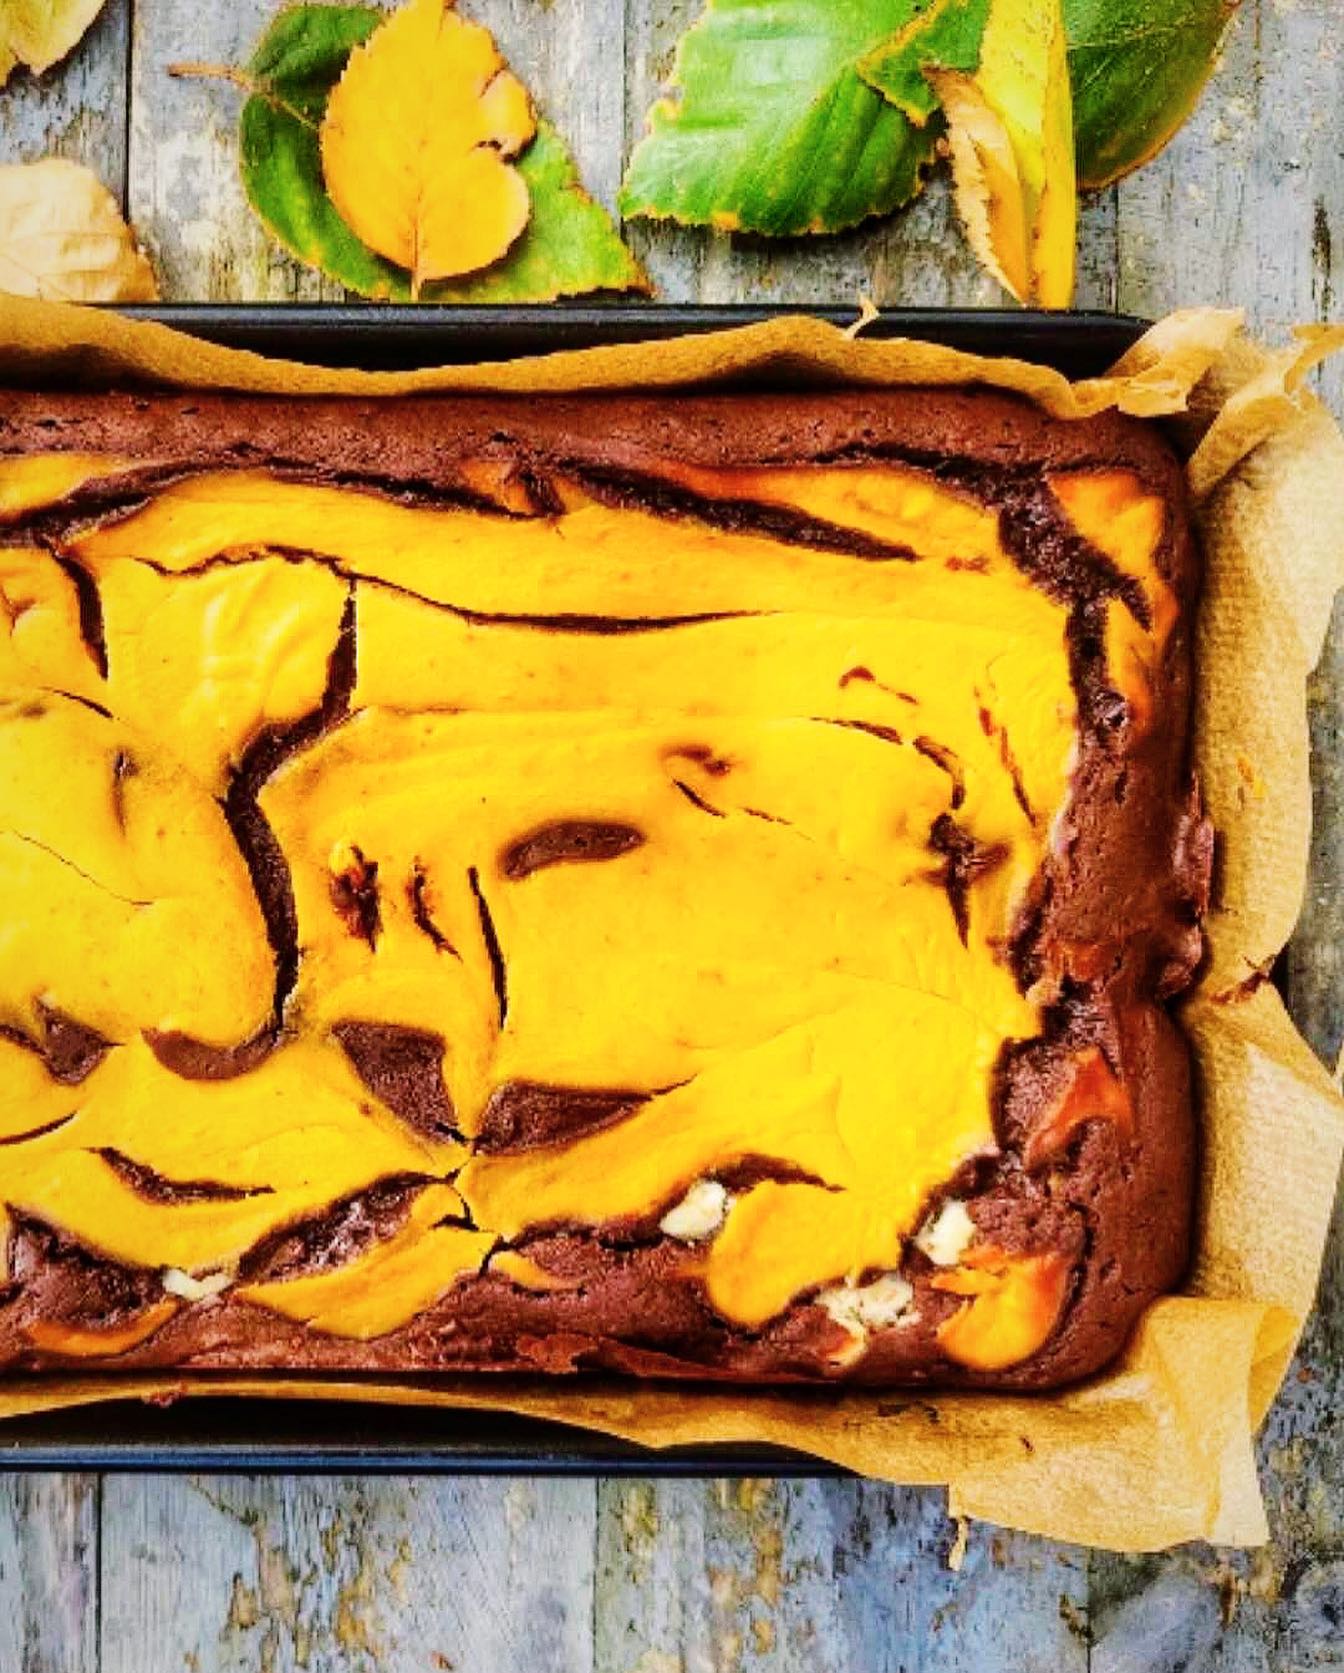 🥕 Is it a fruit or is it a vegetable? Who cares? With less than a week before these beauties disappear from the stores, we're on a mission to celebrate them with as many recipes as we can. Today we're sharing @theyorkshiregourmet ‘s real pleasure teaser: Pumpkin Caramel Cheesecake Brownies 🧡

Layers of rich chocolate brownie, swirled with velvety pumpkin caramel cheesecake goodness. 

Ingredients: 200g unsalted butter | 200g @foodthoughtsuk dark chocolate chips | 1,400g tin caramel | 1 tsp rock salt | 200g golden caster sugar | 5 medium eggs | 130g plain flour | 50g @foodthoughtsuk organic cocoa powder | 200g cream cheese | 75g pumpkin purée

Method:
Preheat the oven to 180C.
Melt the butter and chocolate gently in a pan.
Beat 4 eggs, sugar, caramel, and salt until well combined. Whisk in the melted chocolate butter mixture.
Fold through the flour and cocoa powder.
Spoon half of the brownie batter into the greased tin. Add a layer of the remaining caramel and top with the rest of the brownie mix.
In a bowl, combine the cream cheese with the last egg, pumpkin puree, and mixed spice. Use a knife to swirl this mixture through the top of the brownies.
Bake for 35-45 minutes or until a toothpick comes out with a few moist crumbs.

What is YOUR twist on the classic pumpkin-chocolate combo? ‍

Follow @theyorkshiregourmet for more mouthwatering creations 📸🤤